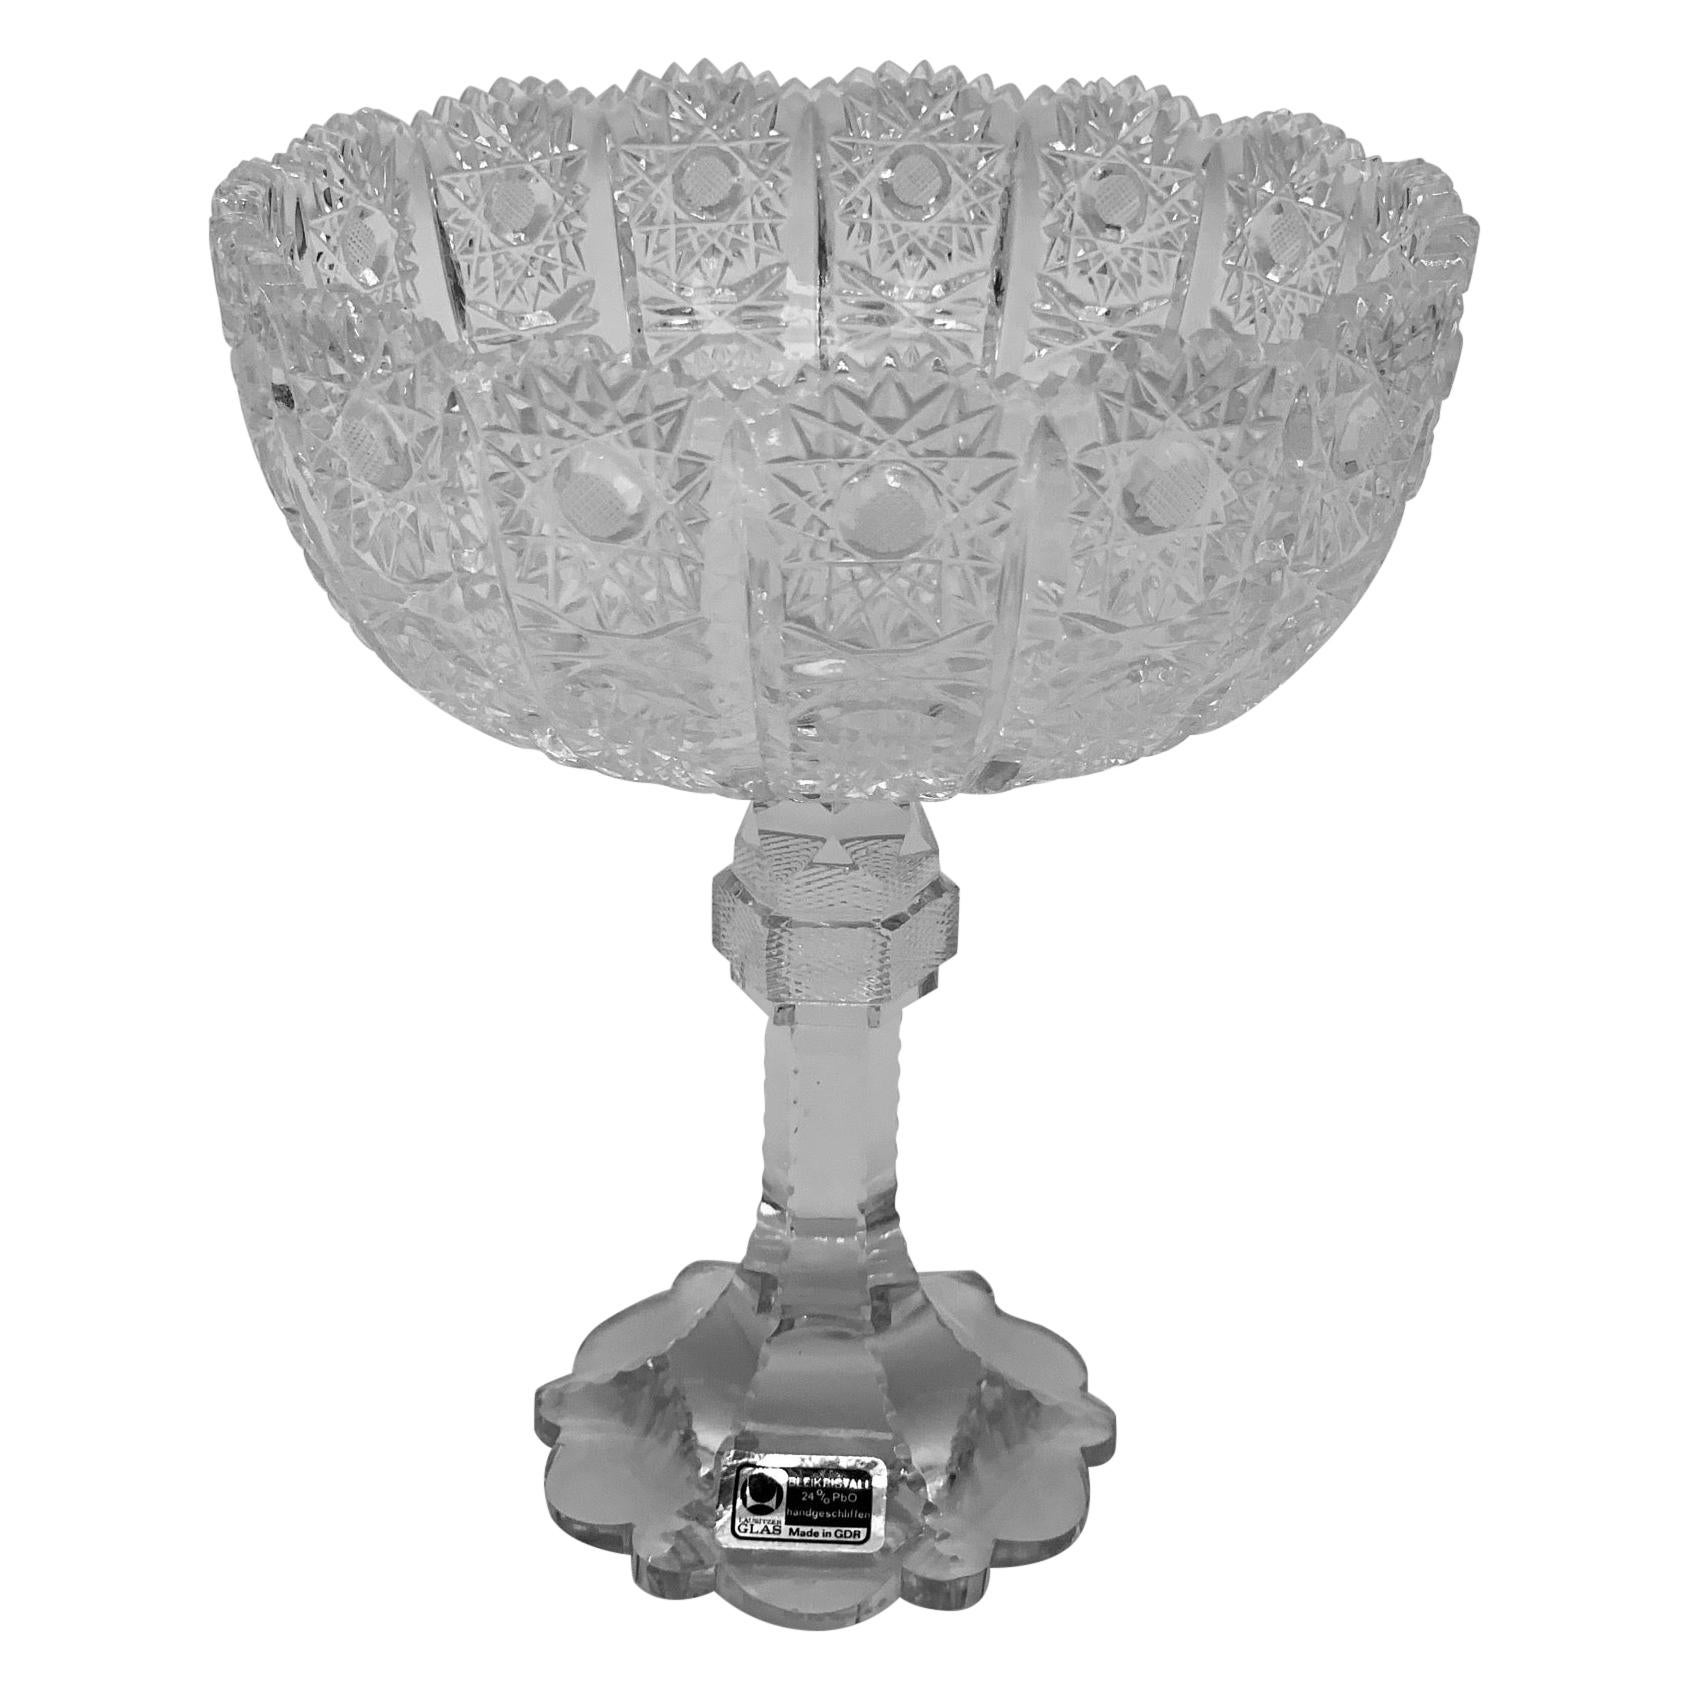 1945 Servebowl with Lead Crystal Cut Patterns For Sale